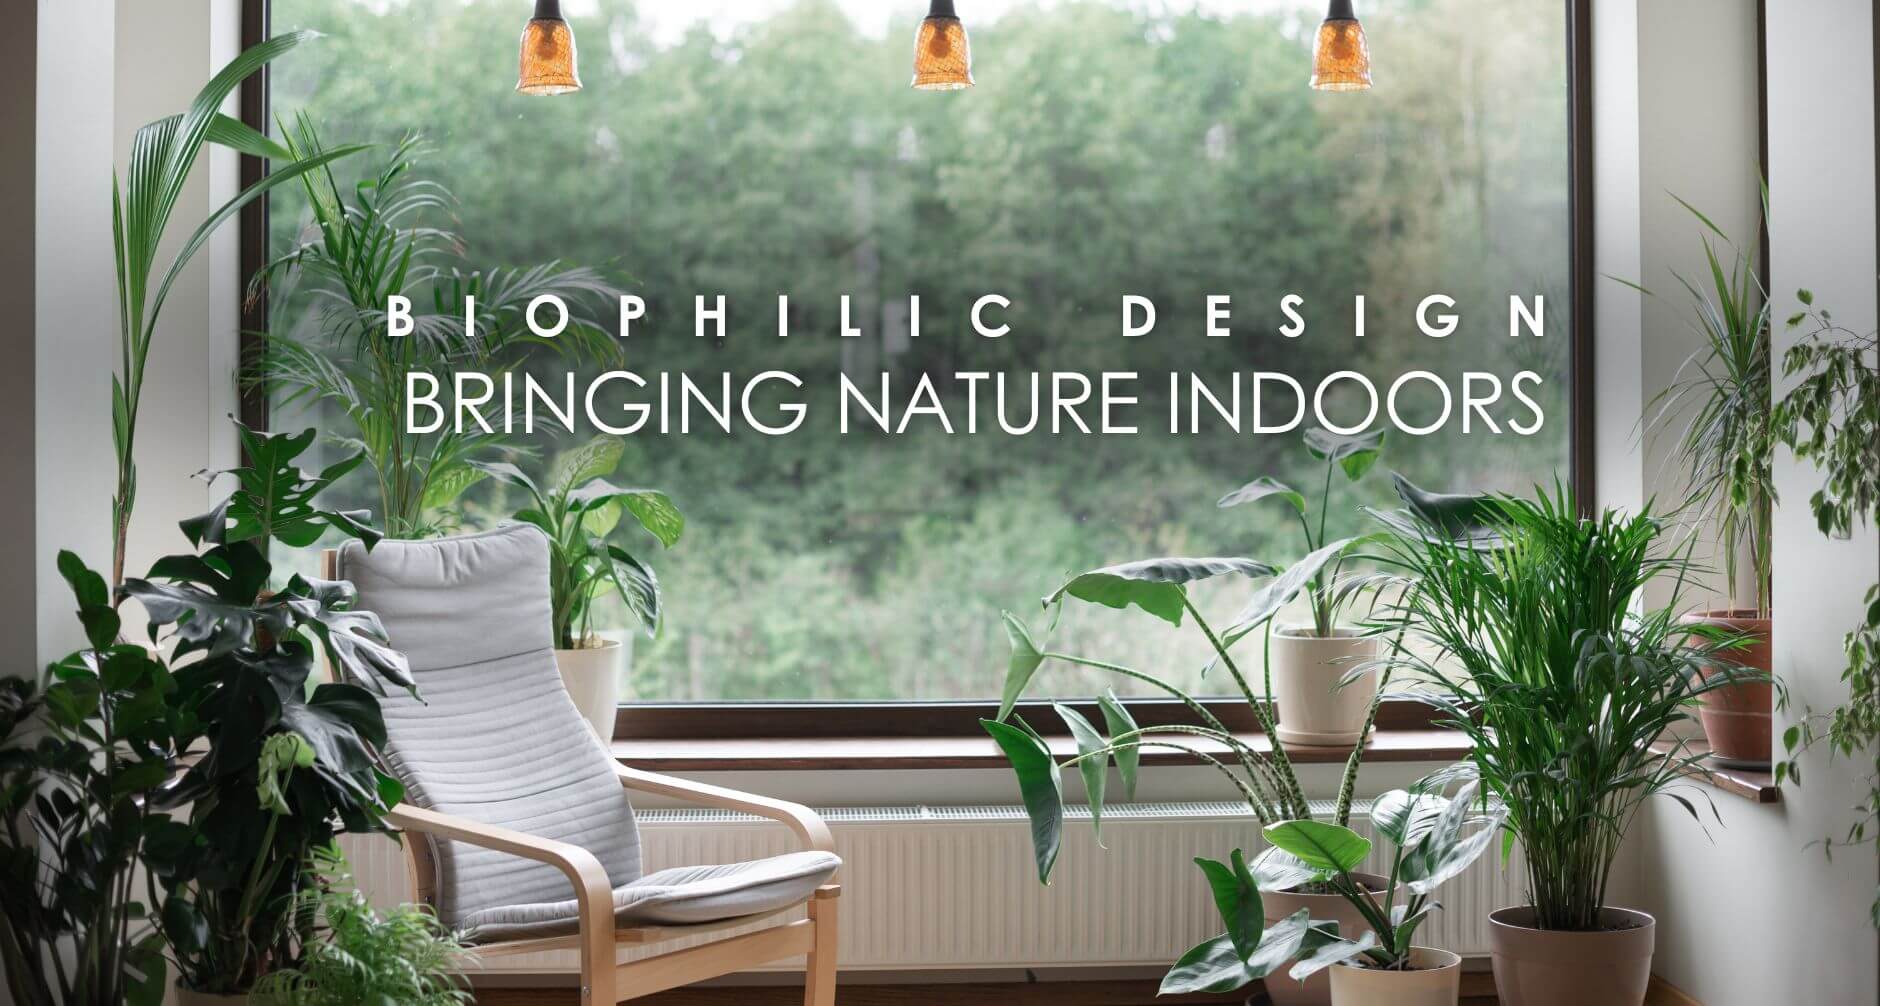 Learn how to bring nature indoors with tips on maximizing natural light, using indoor plants, incorporating natural materials, and more.